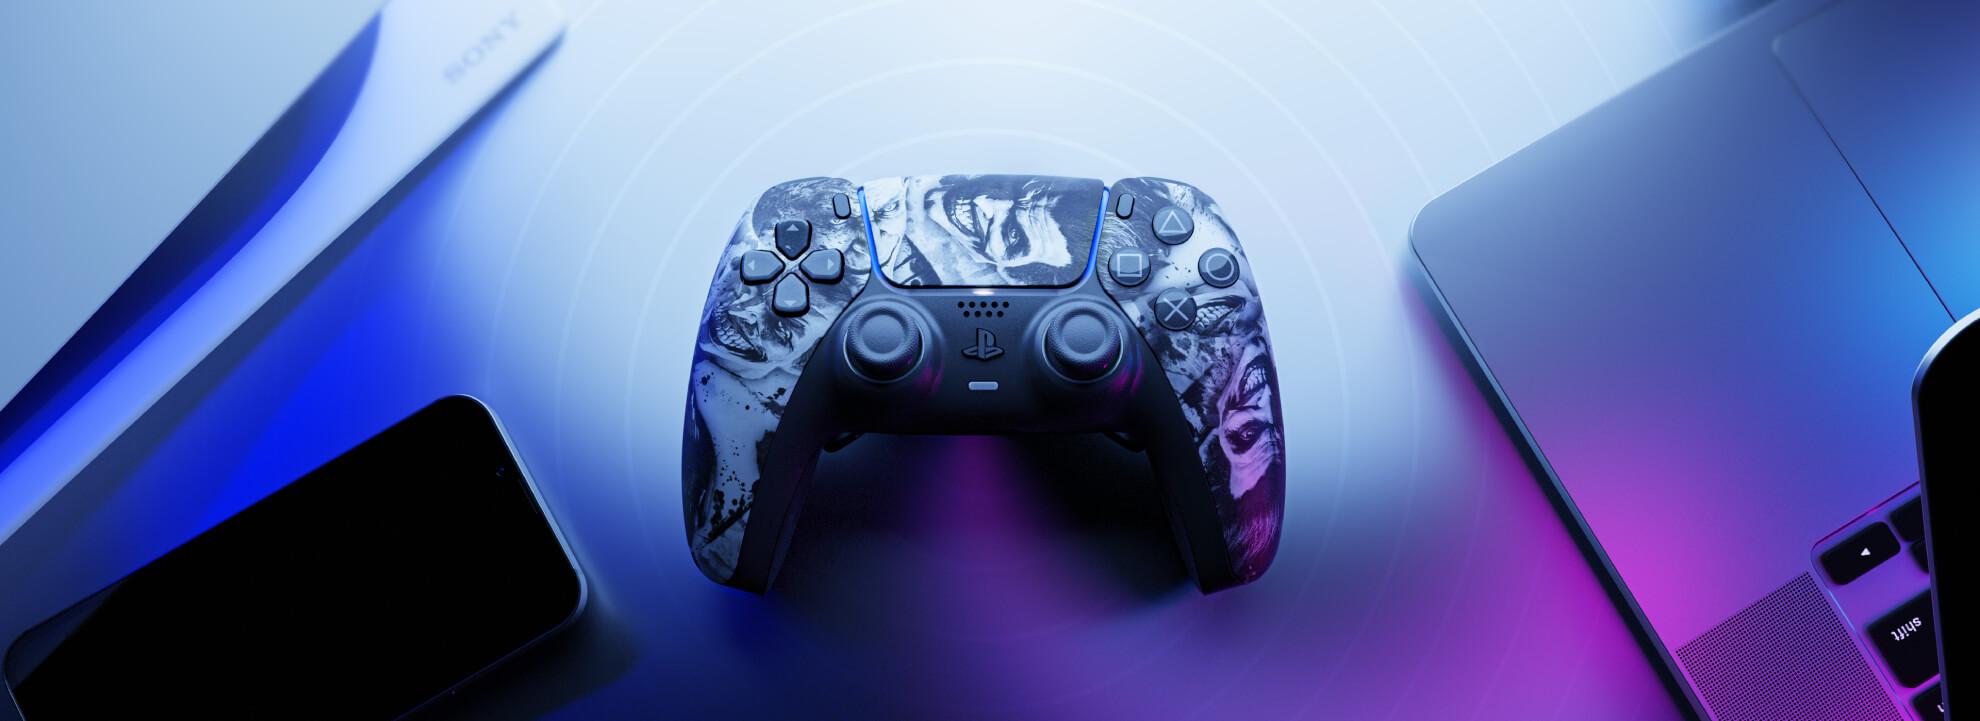 Create Your Own Ps5 Controller Custom Design